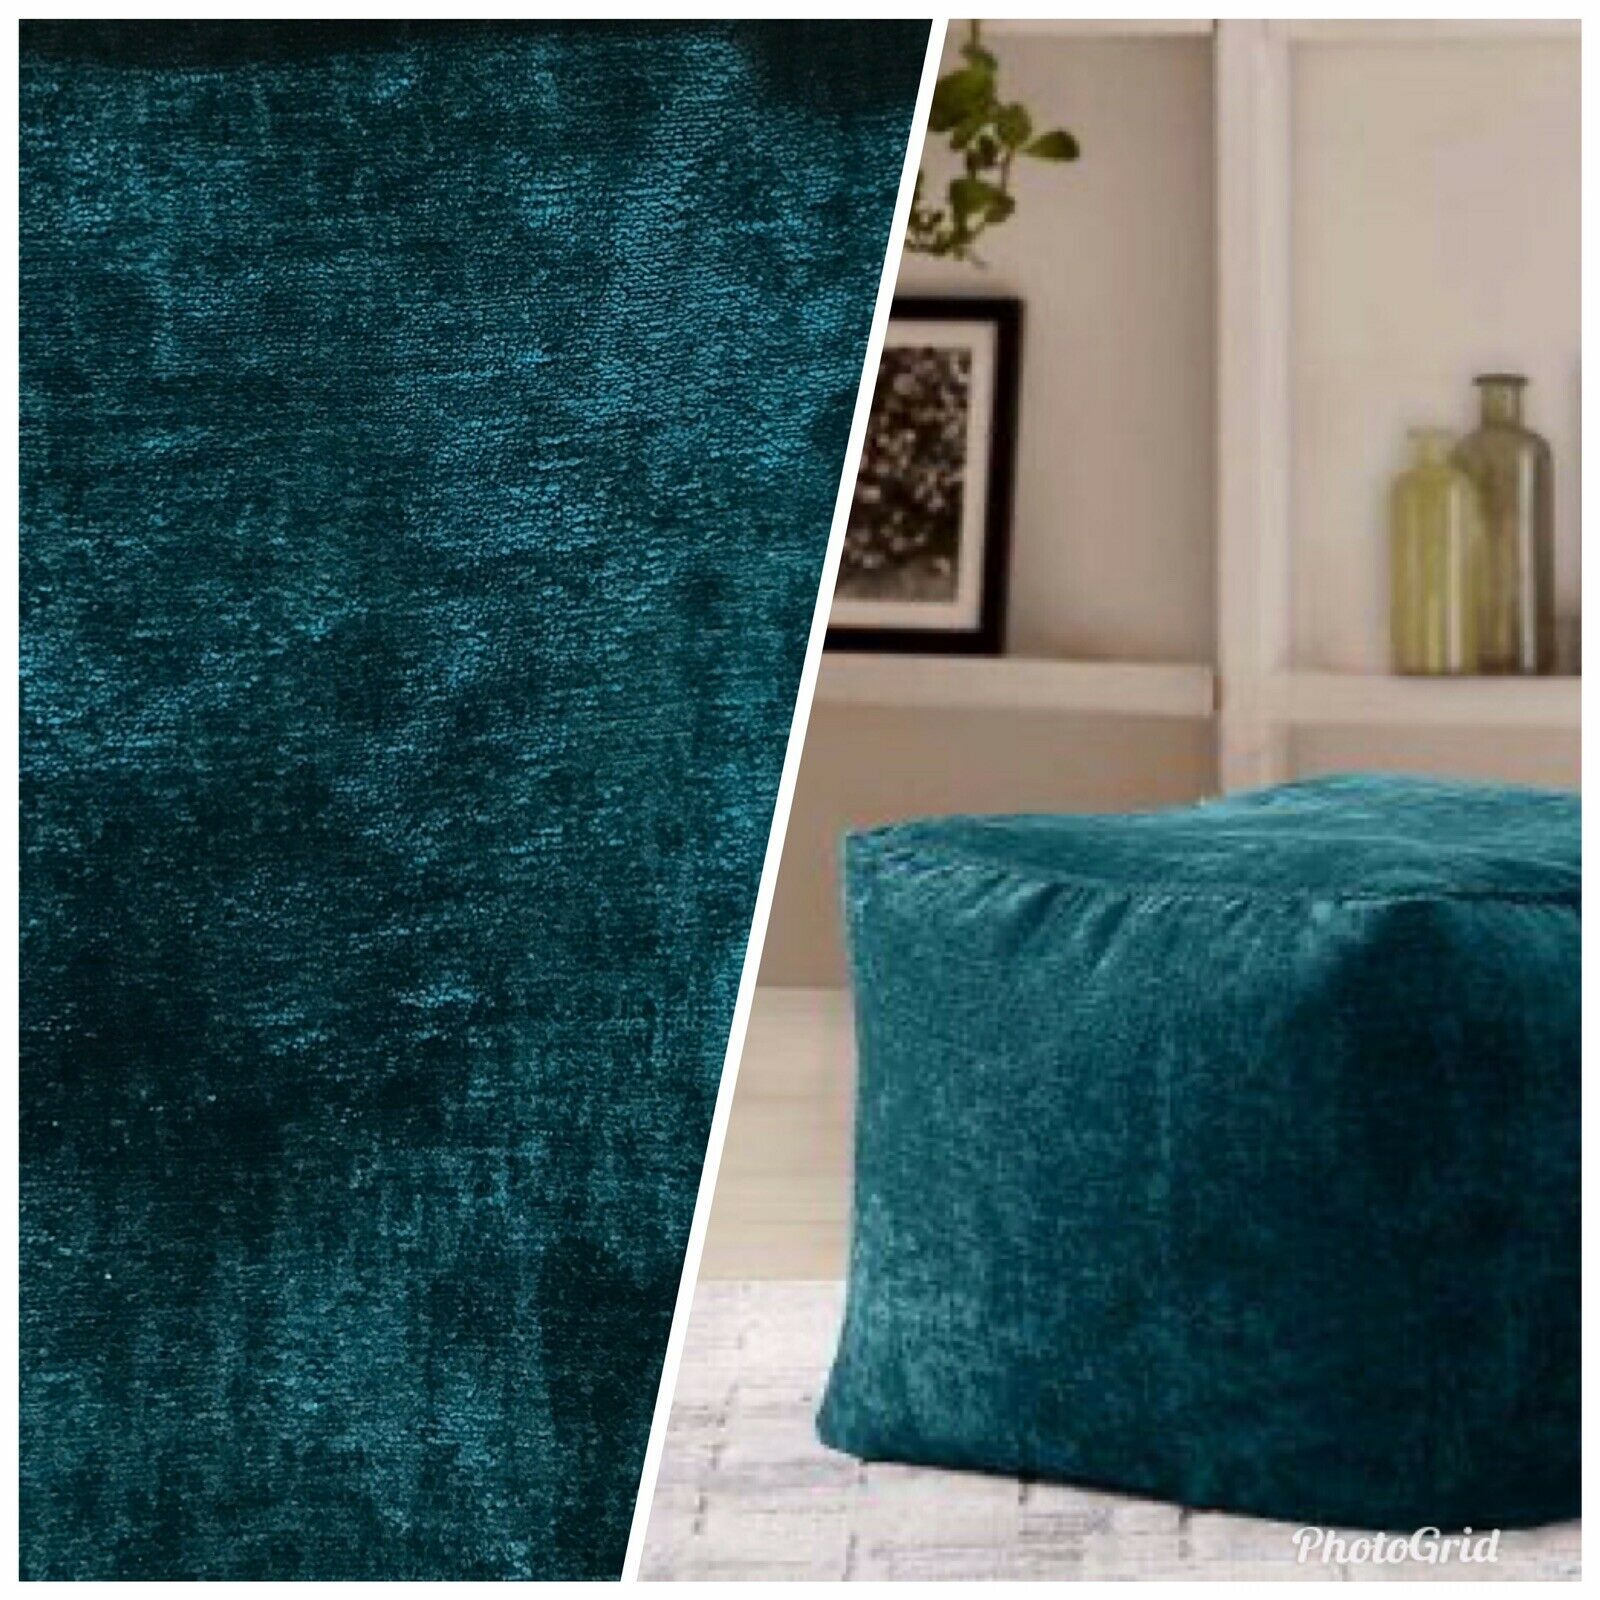 Lush Upholstery Turquoise Teal Soft Chenille Fabric By The Yard